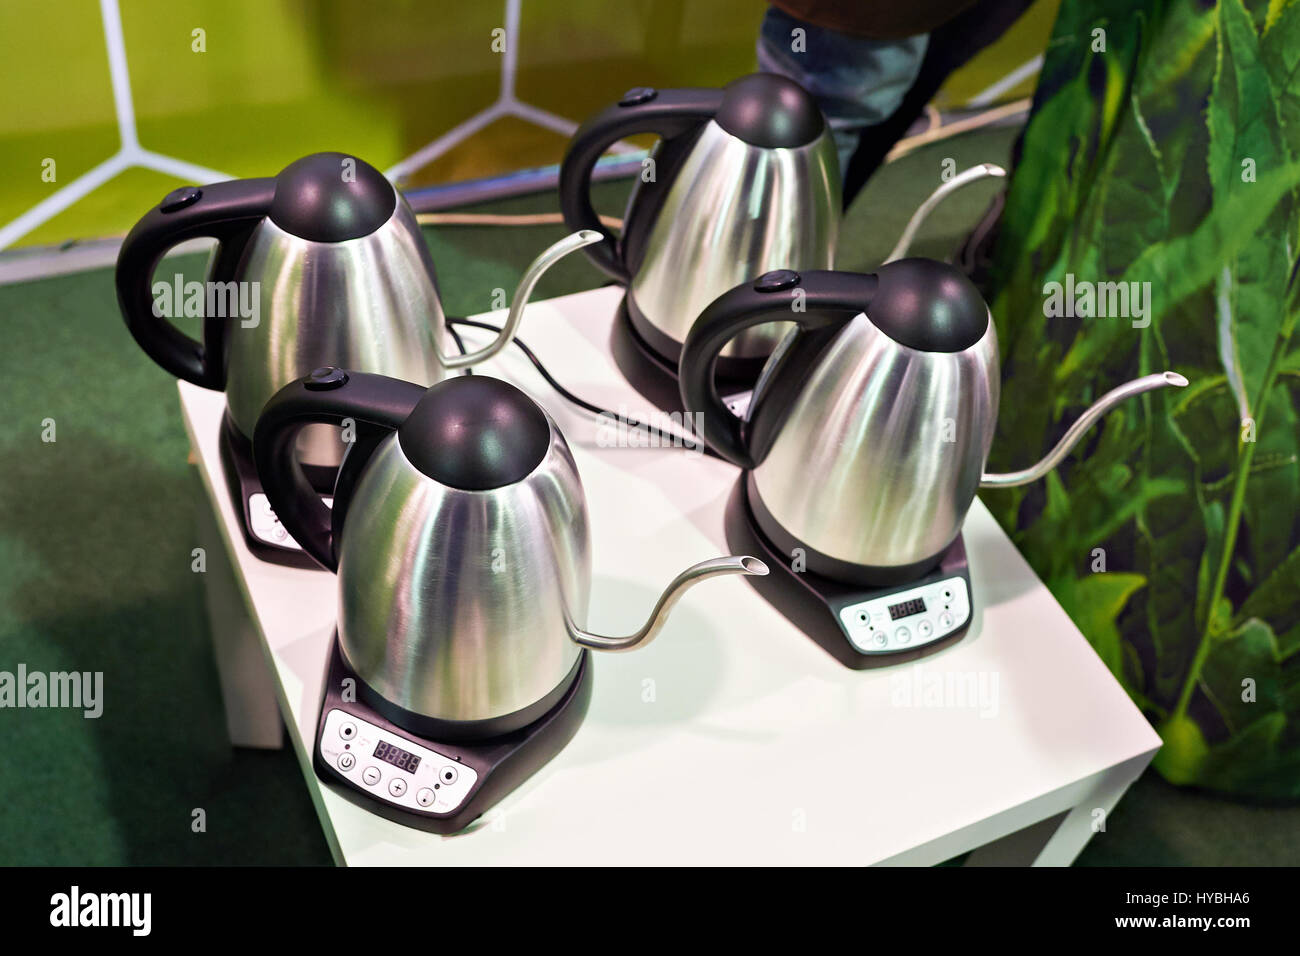 Four electric teapots for brewing tea Stock Photo